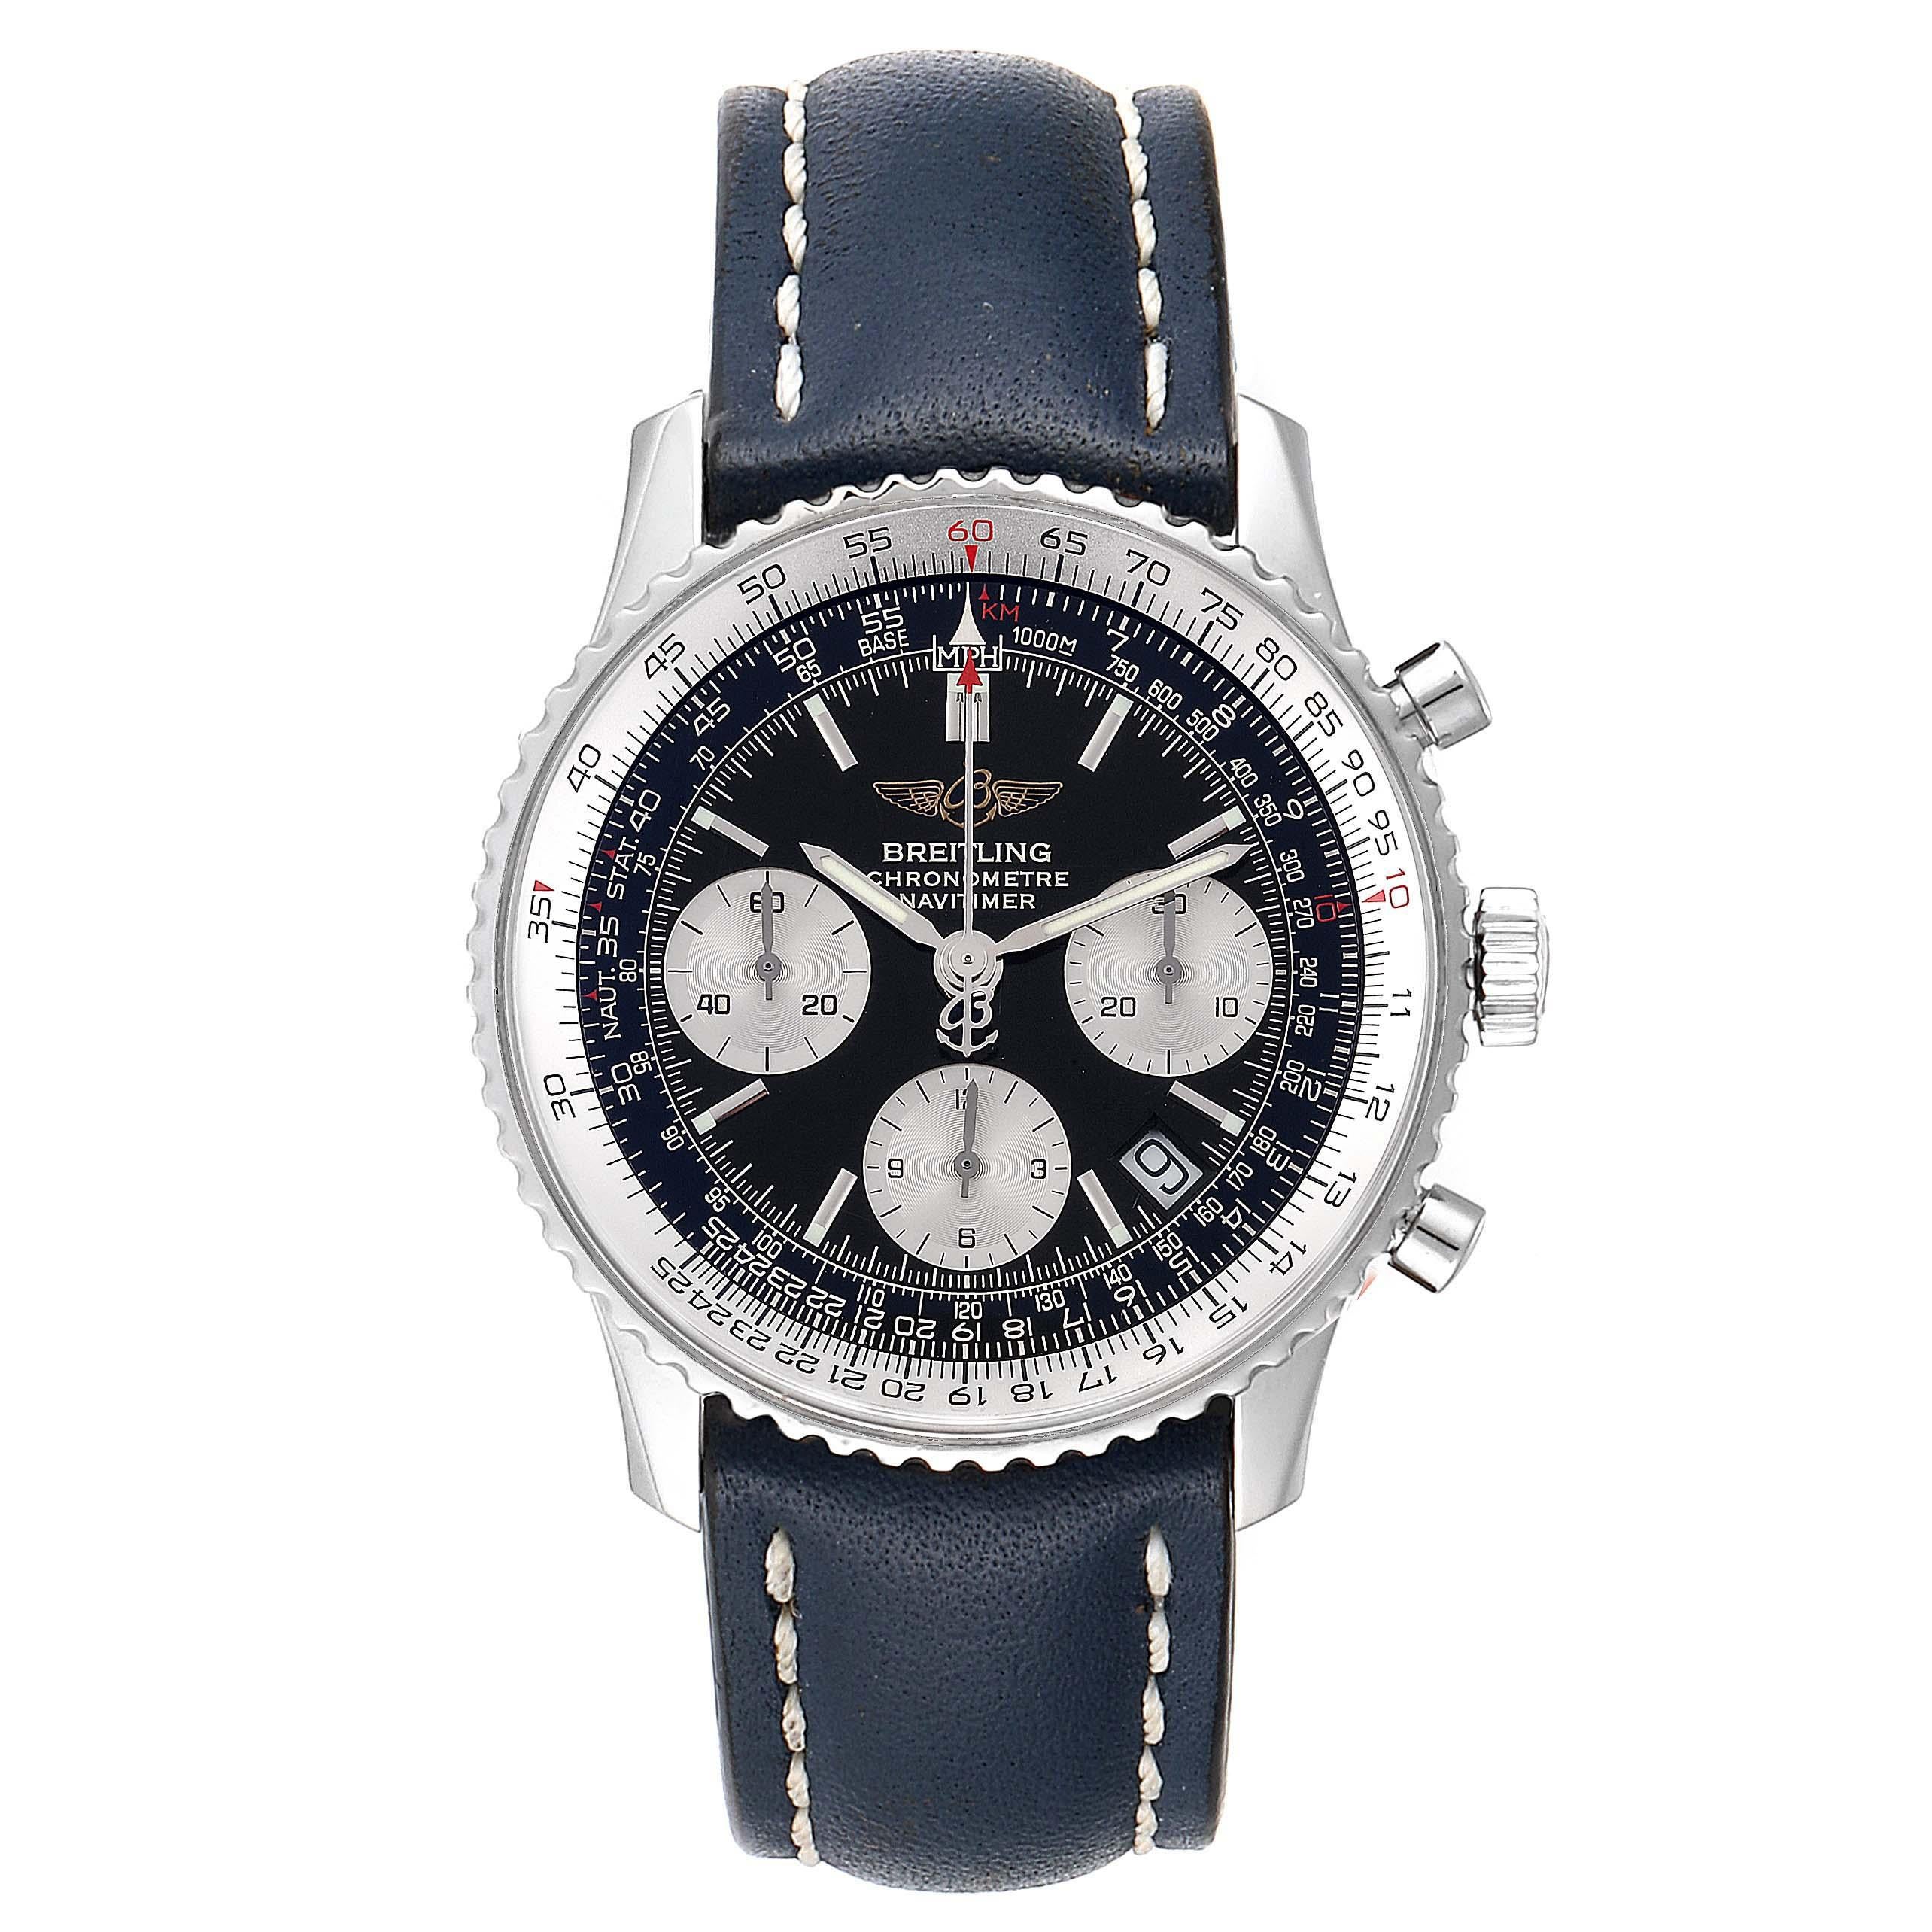 Breitling Navitimer Black Dial Chronograph Mens Watch A23322 Box Papers. Automatic self-winding officially certified chronometer movement. Chronograph function. Rhodium-plated, 25 jewels, straight-line lever escapement, monometallic balance adjusted